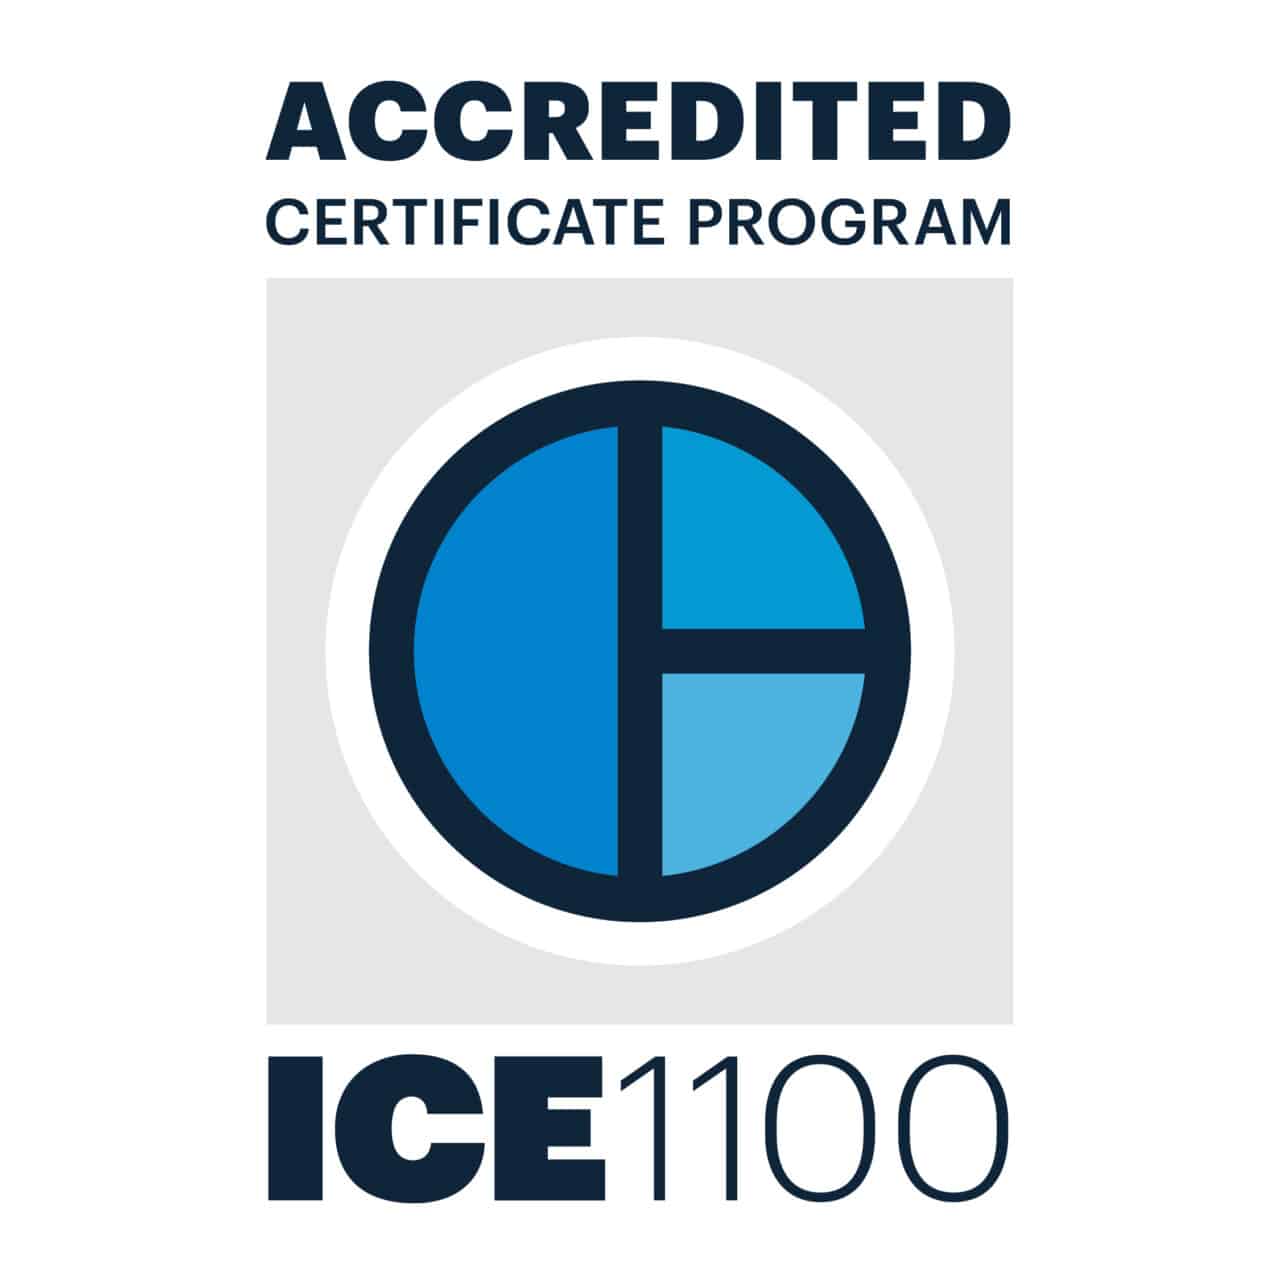 For TAC - ICE-SubBrands_ICE1100 ACCREDITED STAMP